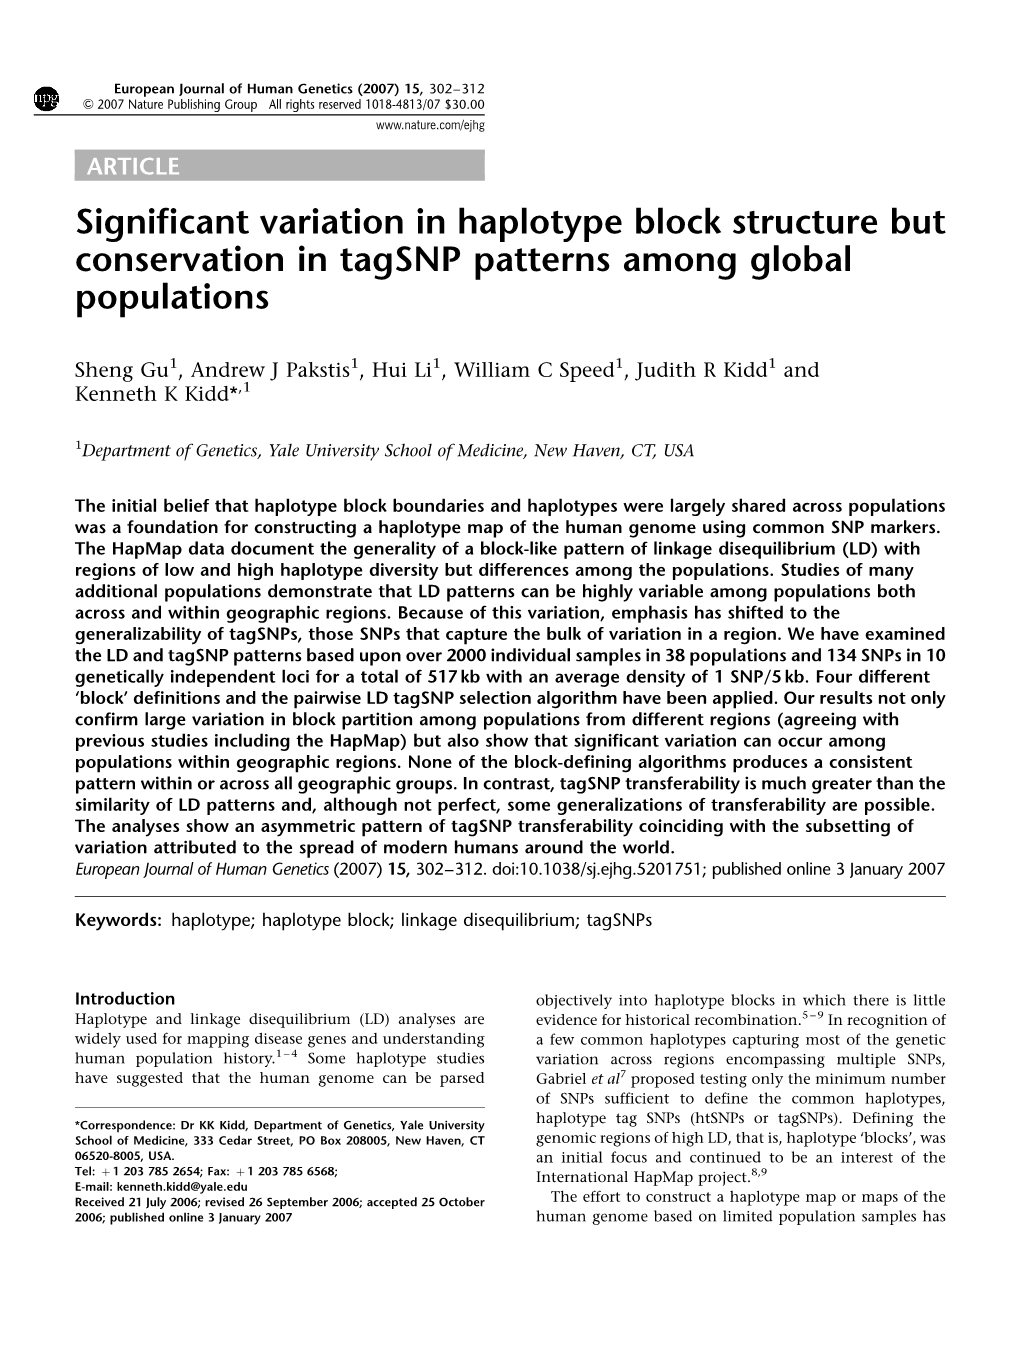 Significant Variation in Haplotype Block Structure but Conservation in Tagsnp Patterns Among Global Populations